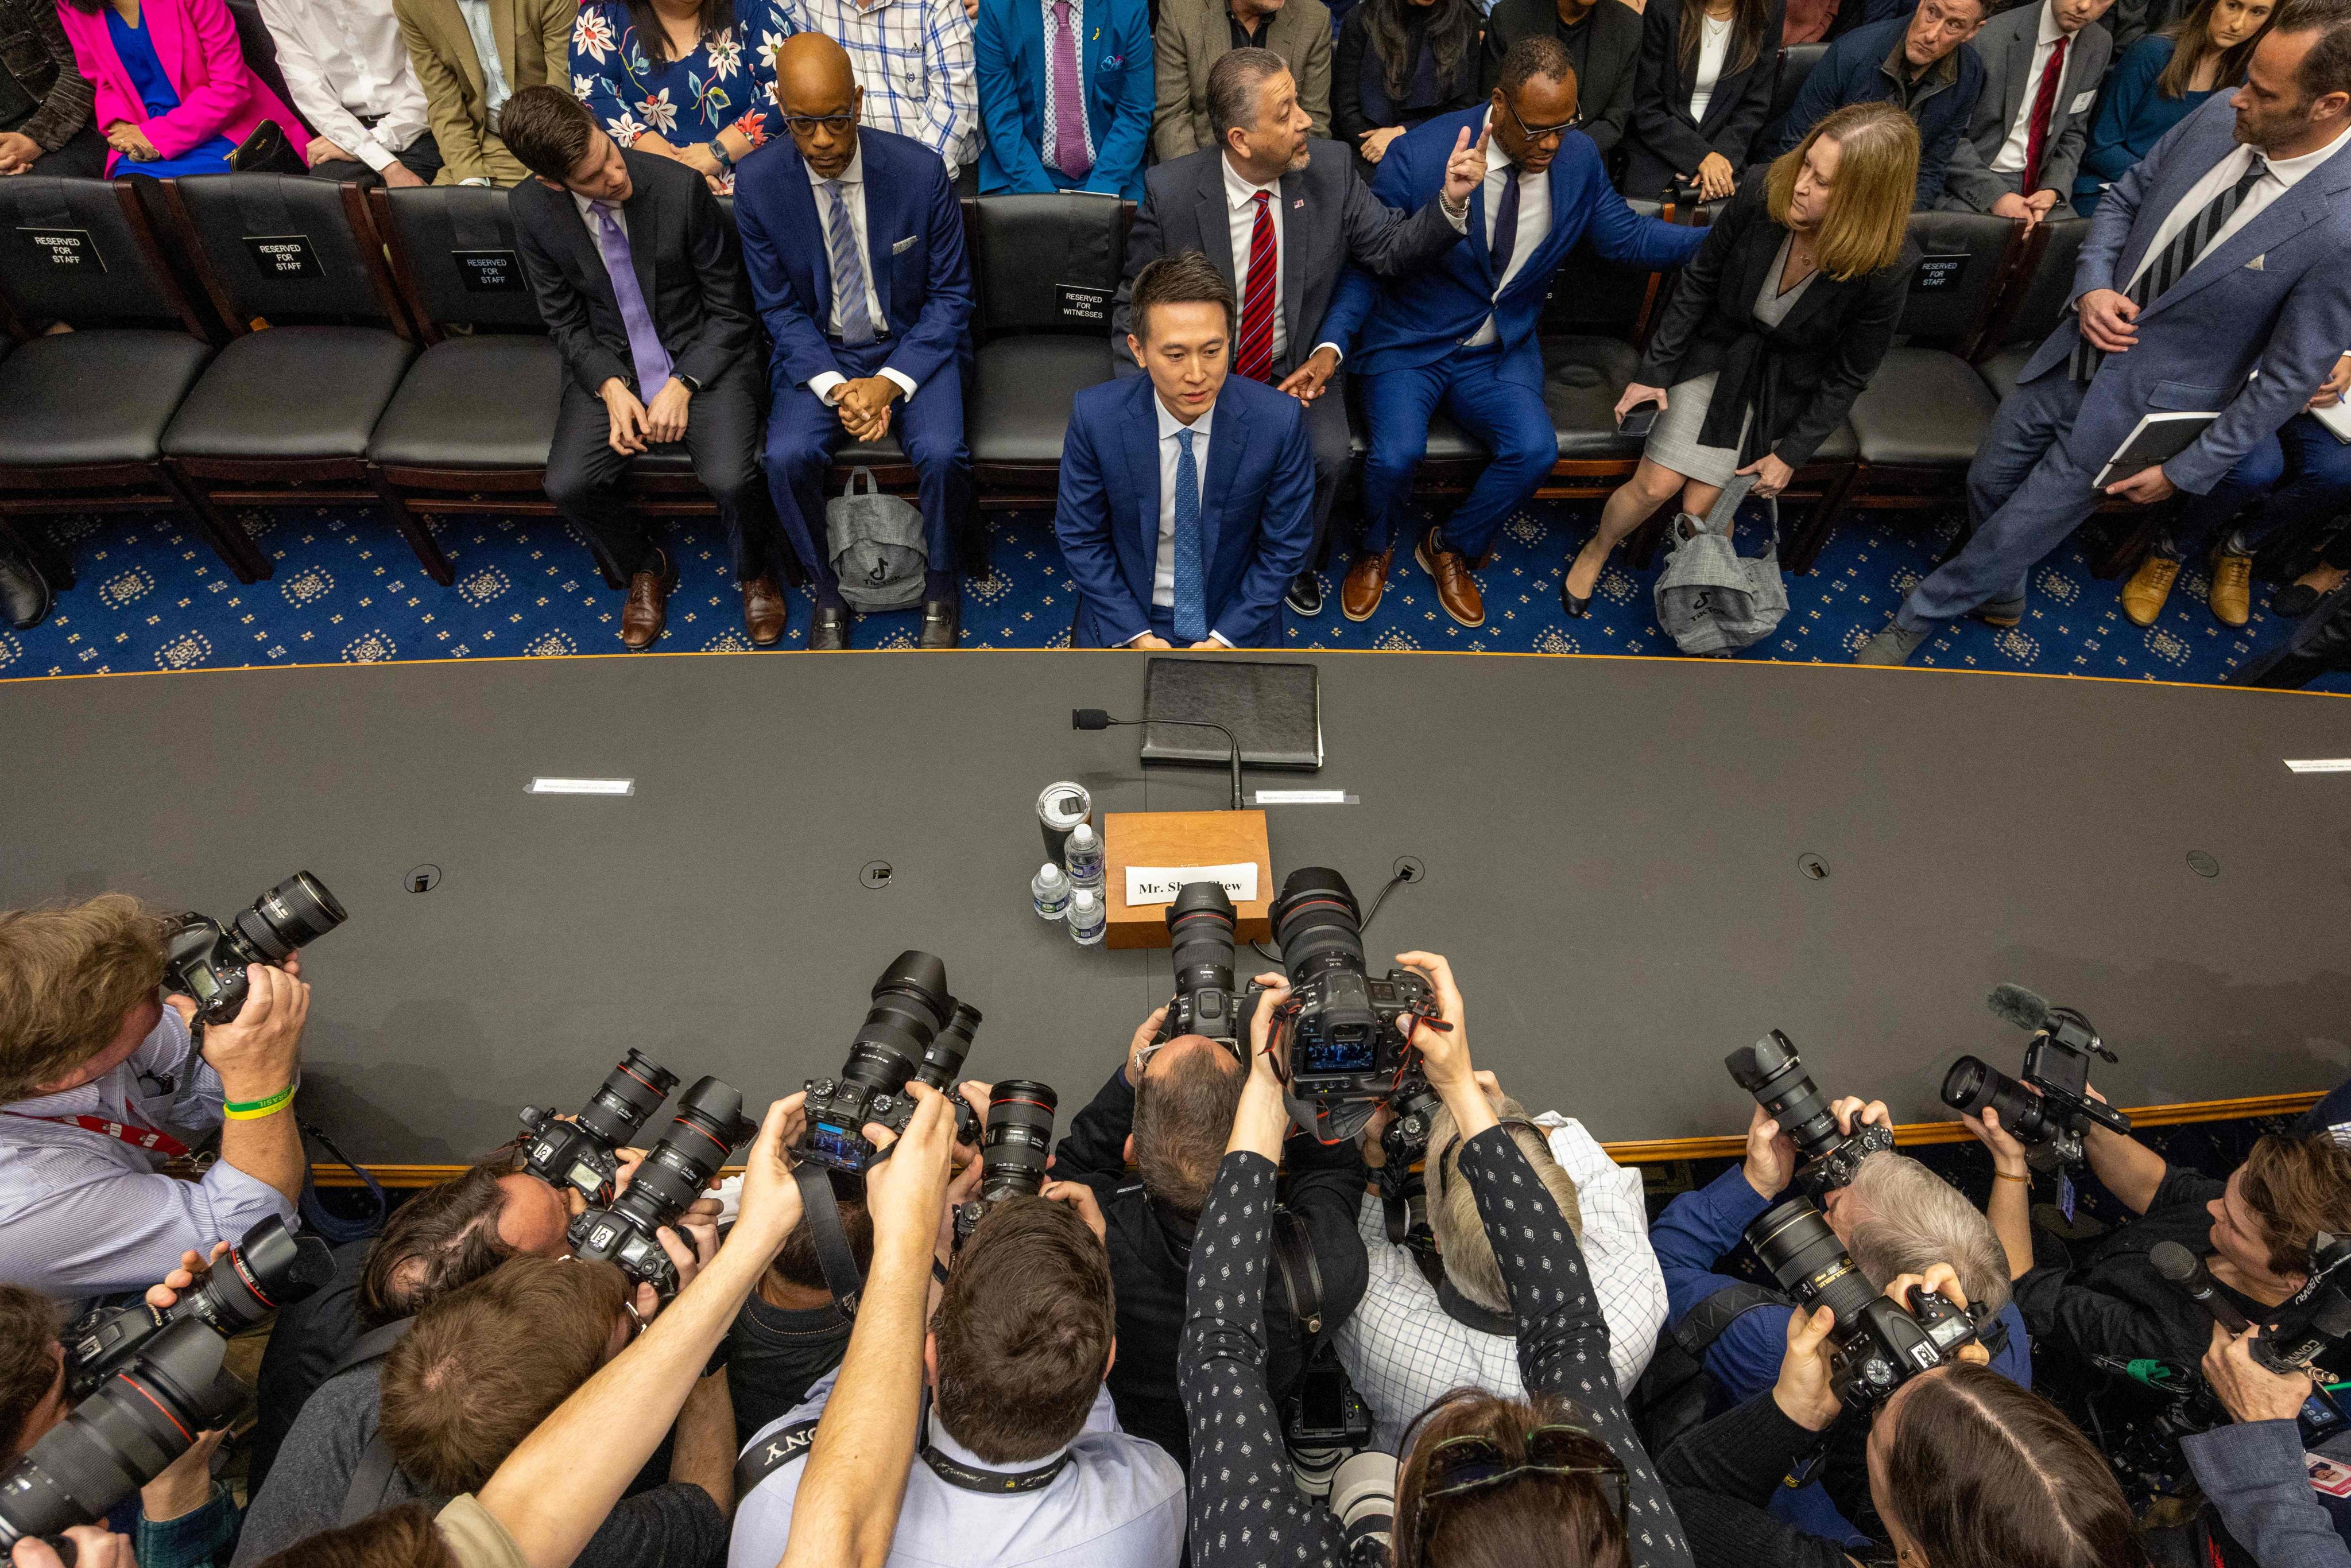 TikTok CEO Chew Shou Zi prepares to testify before the House Energy and Commerce Committee in the Rayburn House Office Building on Capitol Hill on March 23. Photo: Getty Images/AFP